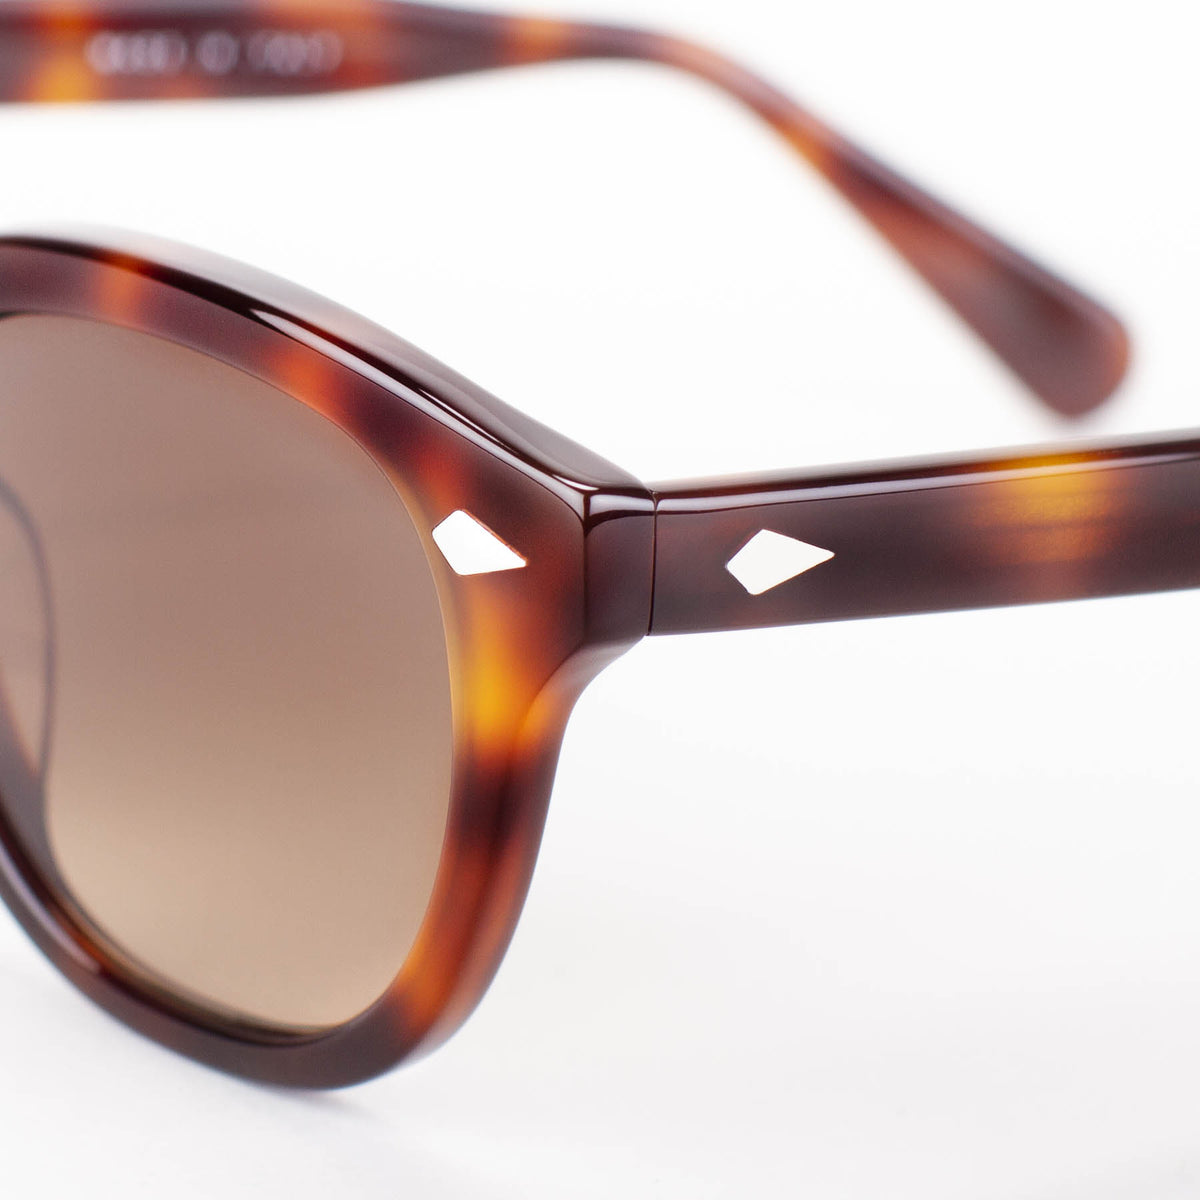 'Out of' Giulia Acetate sunglasses designed and made in Italy. Detail.